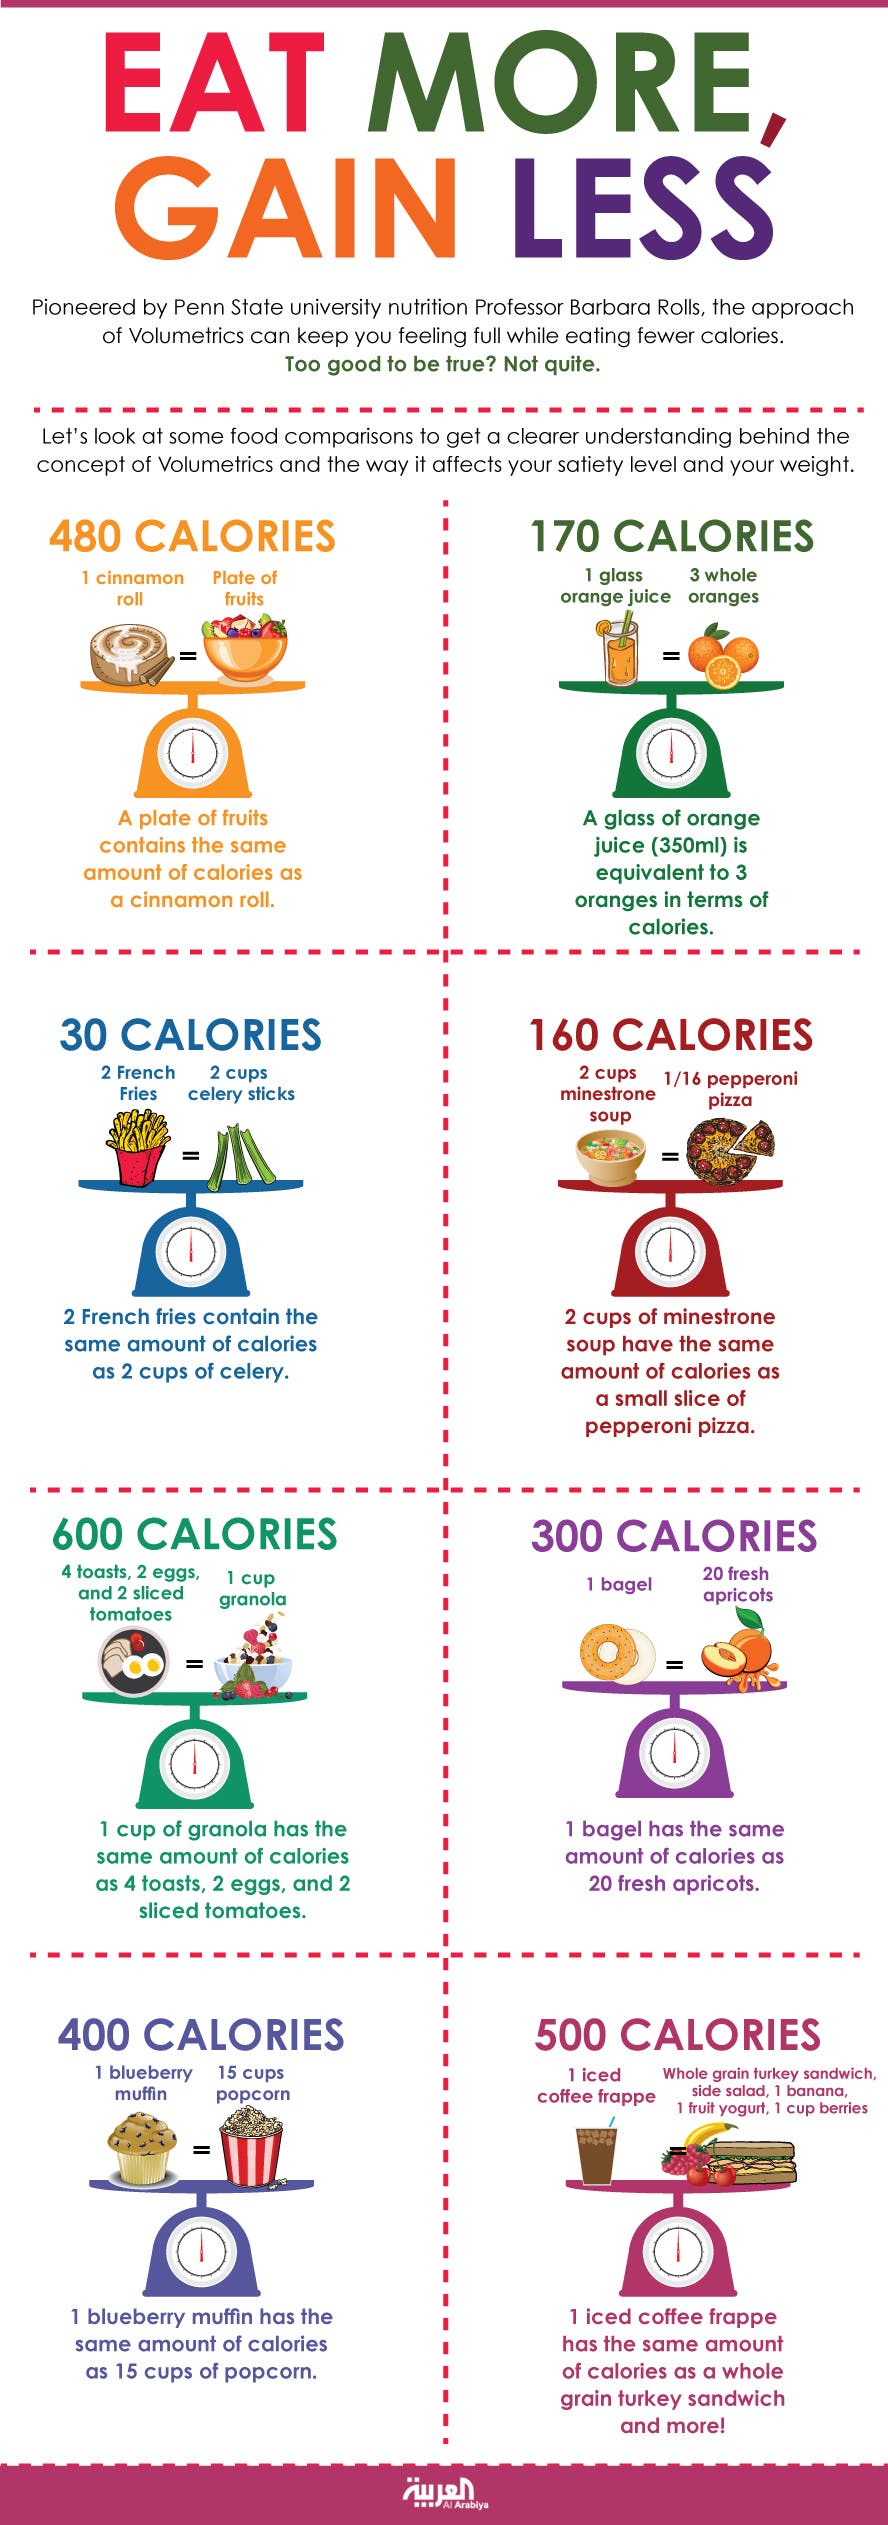 Infographic: Eat more, gain less